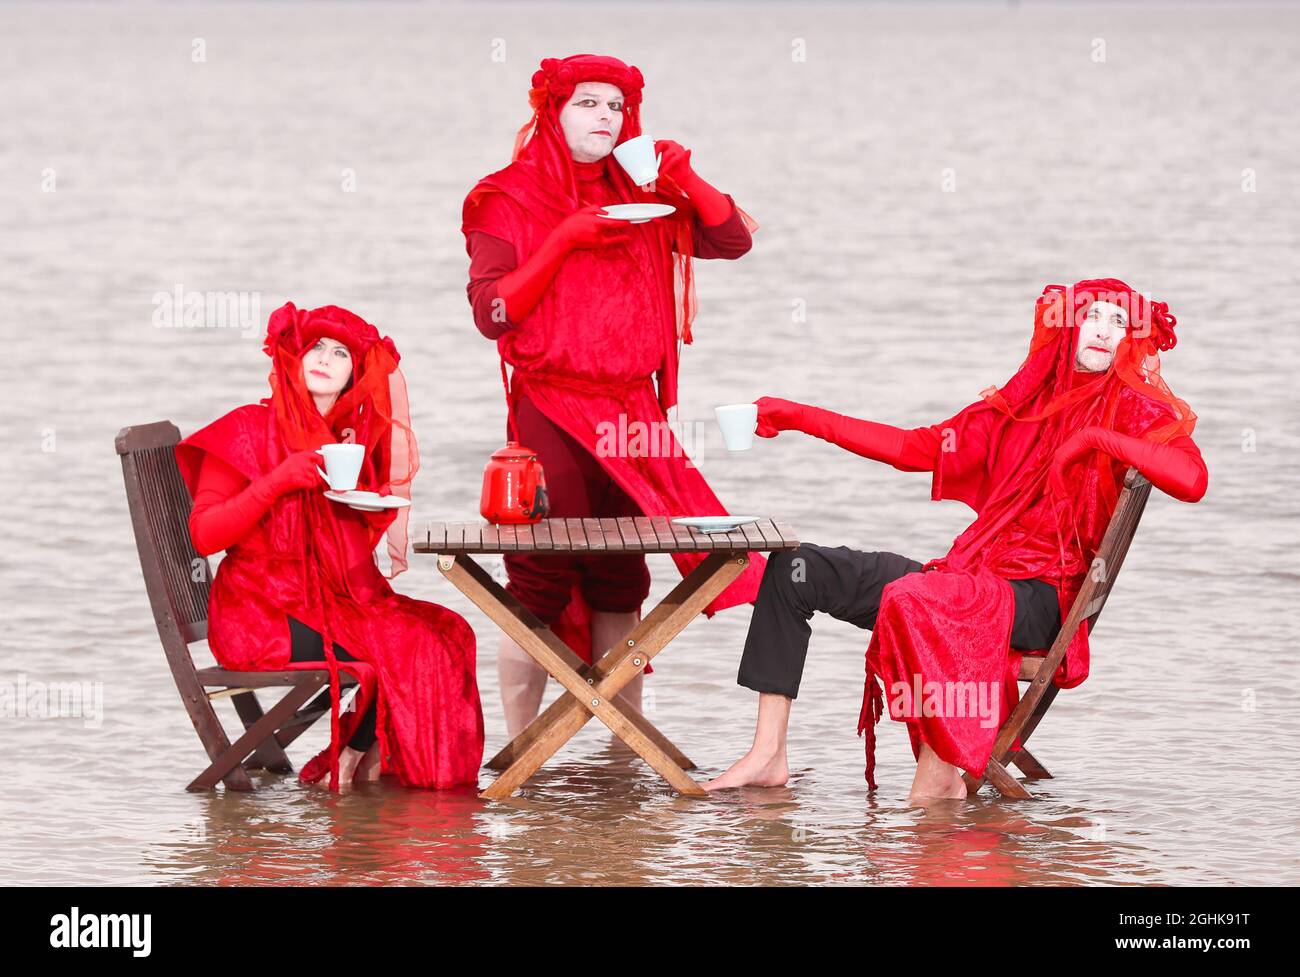 Extinction Rebellion’s Red Rebels hold a Tea in the Sea protest in Belfast Lough at Seapark, Co. Down, in Northern Ireland. Stock Photo